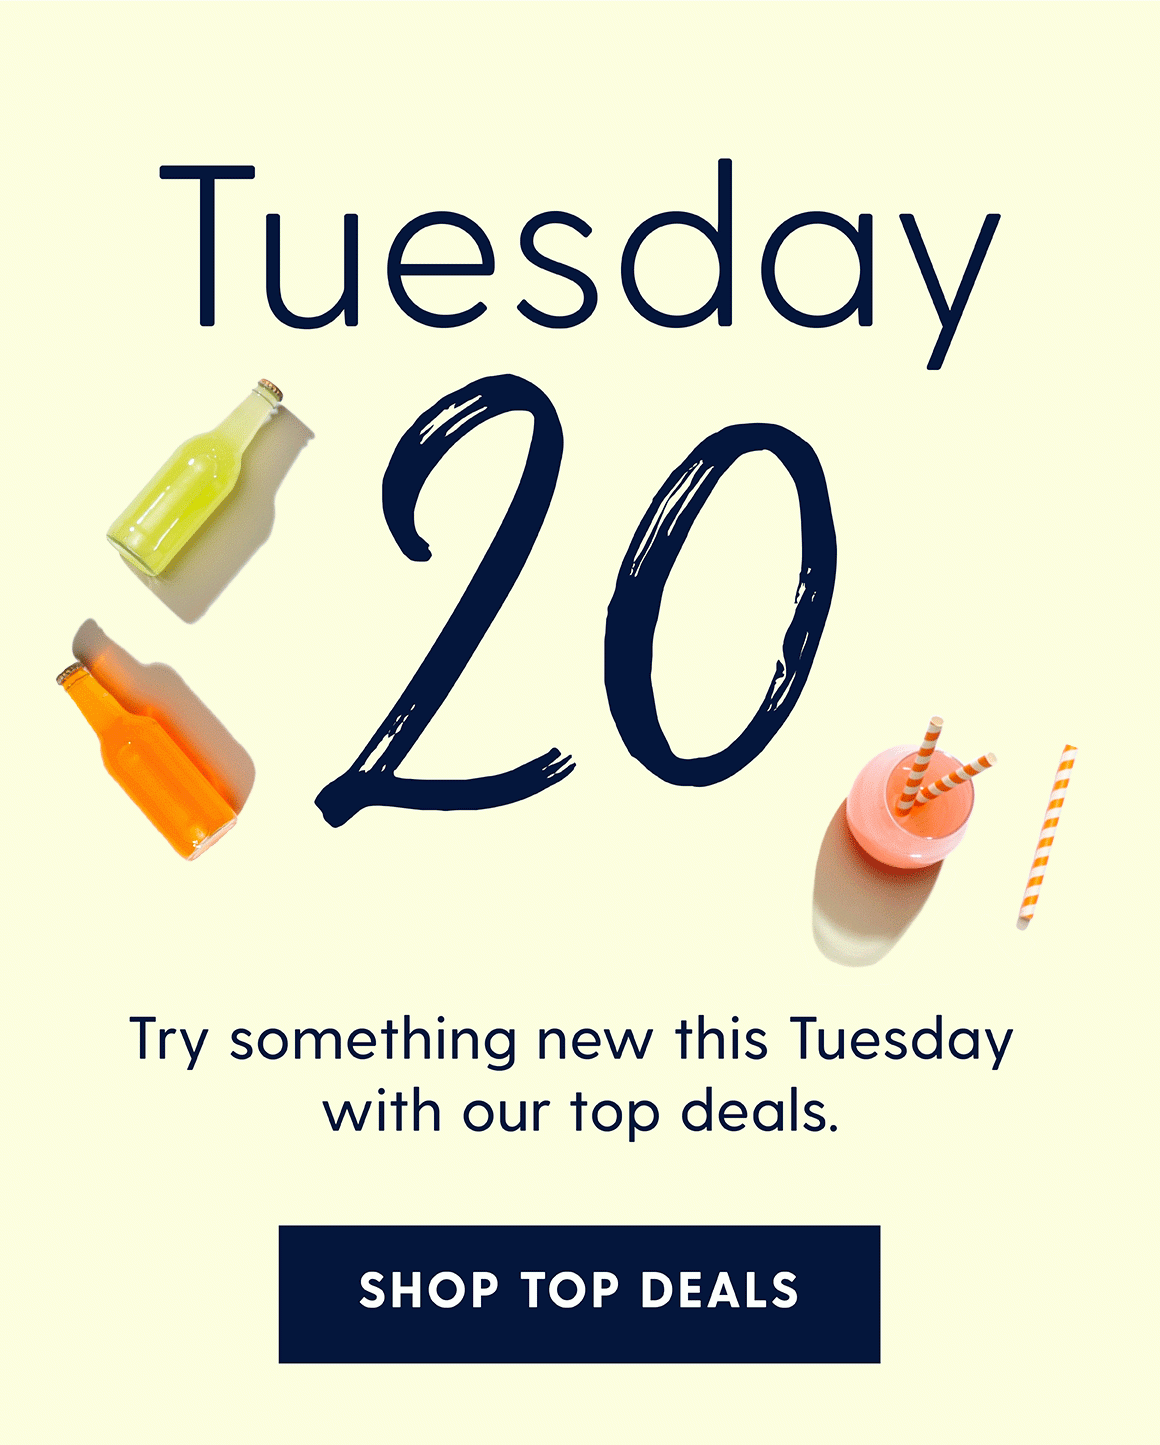 Tuesday 20. Try something new this tuesday with our top deals. Shop top deals. 